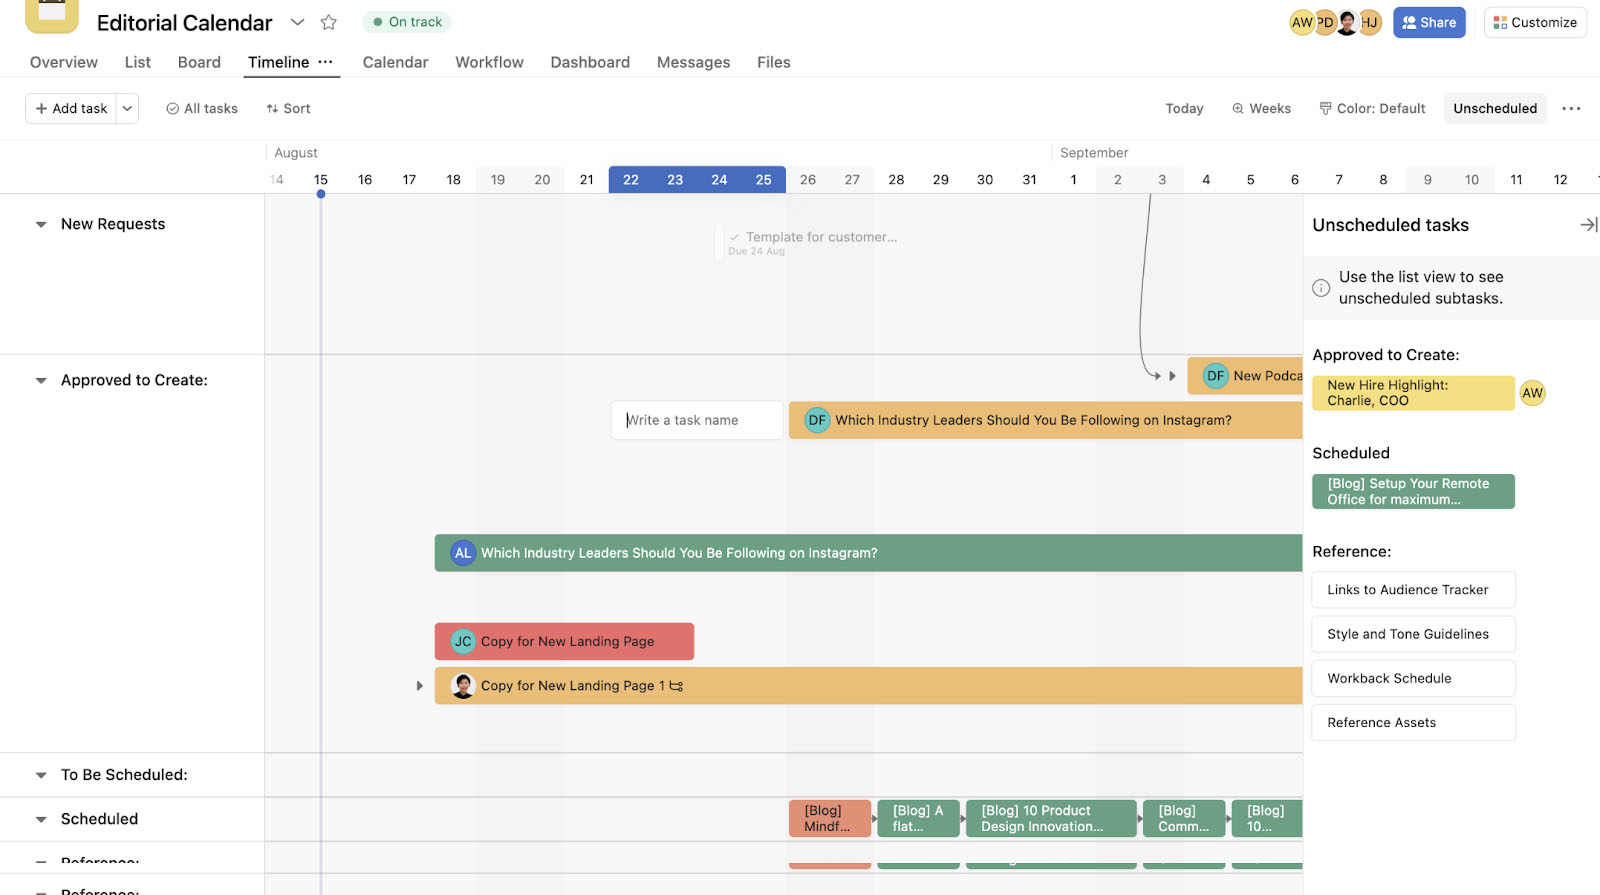 Unscheduled tasks section on Asana timeline view.